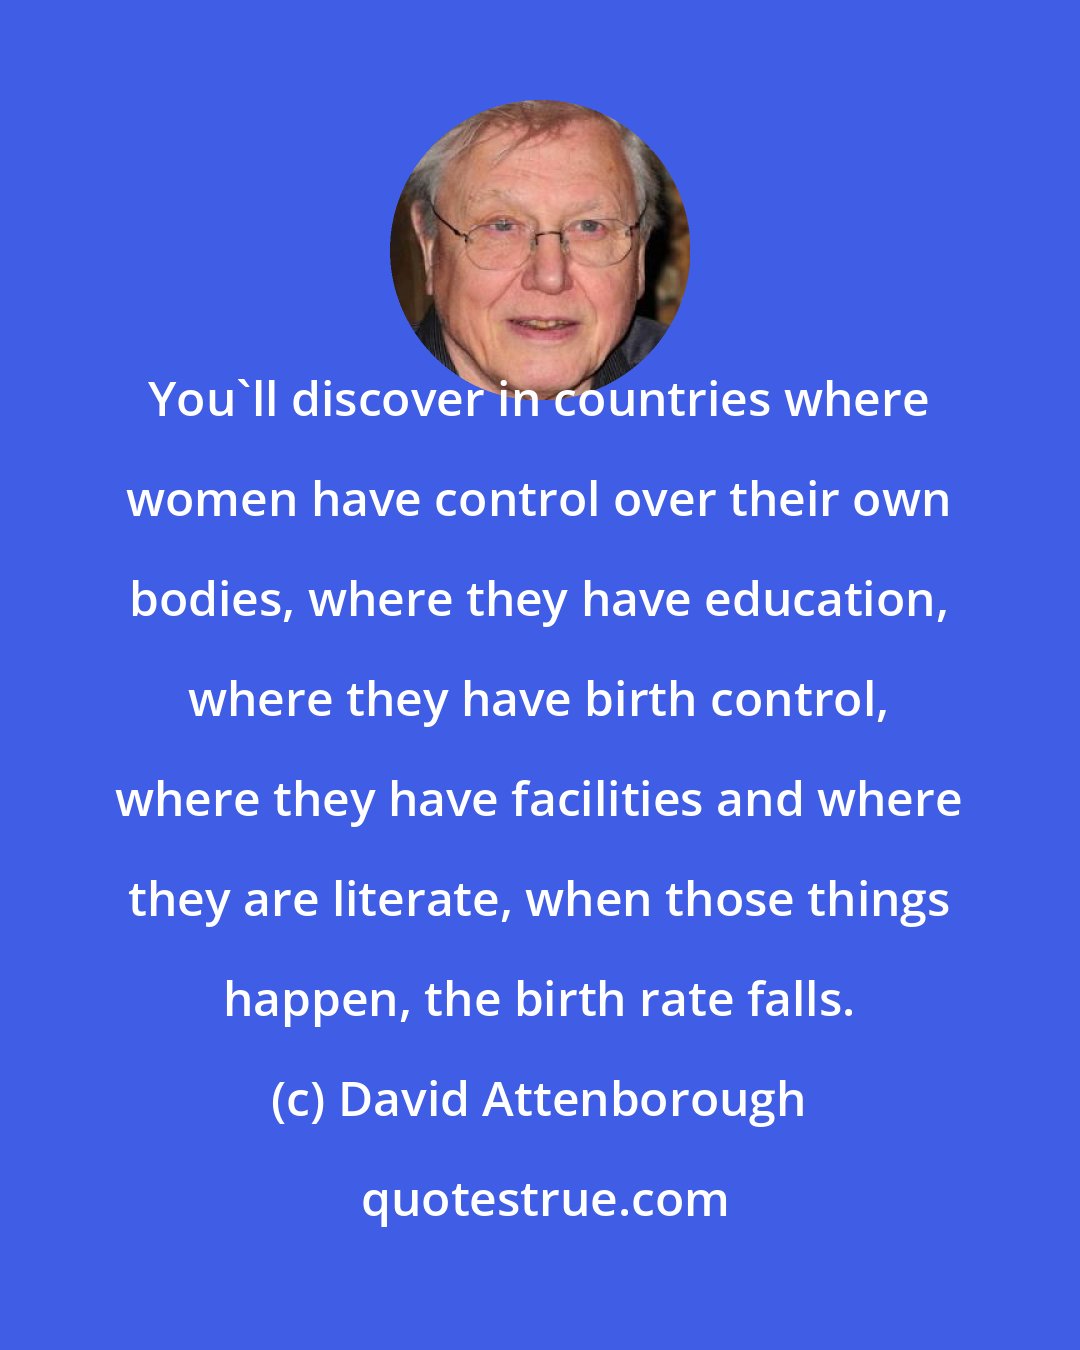 David Attenborough: You'll discover in countries where women have control over their own bodies, where they have education, where they have birth control, where they have facilities and where they are literate, when those things happen, the birth rate falls.